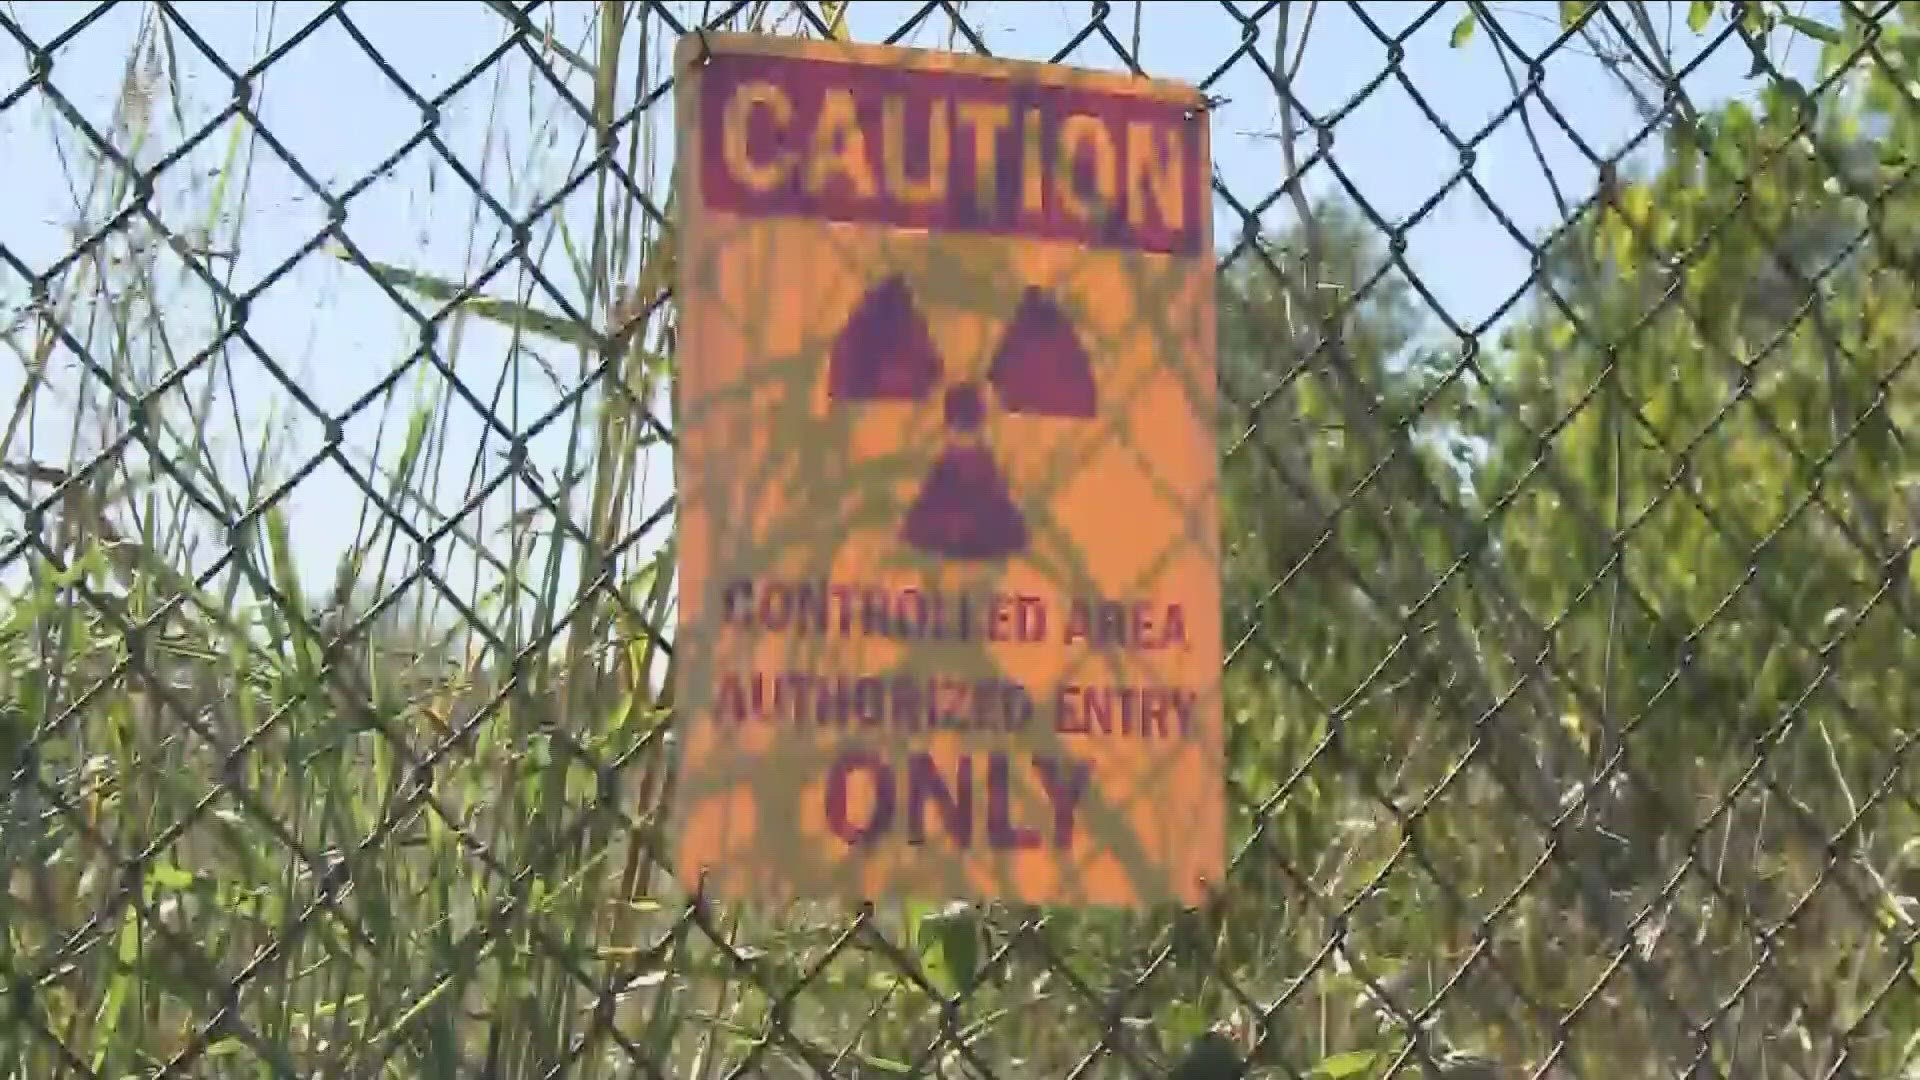 The funds would be in addition to general revenue funding to help pay for radioactive waste investigations in the St. Louis area. Several sites remain affected.